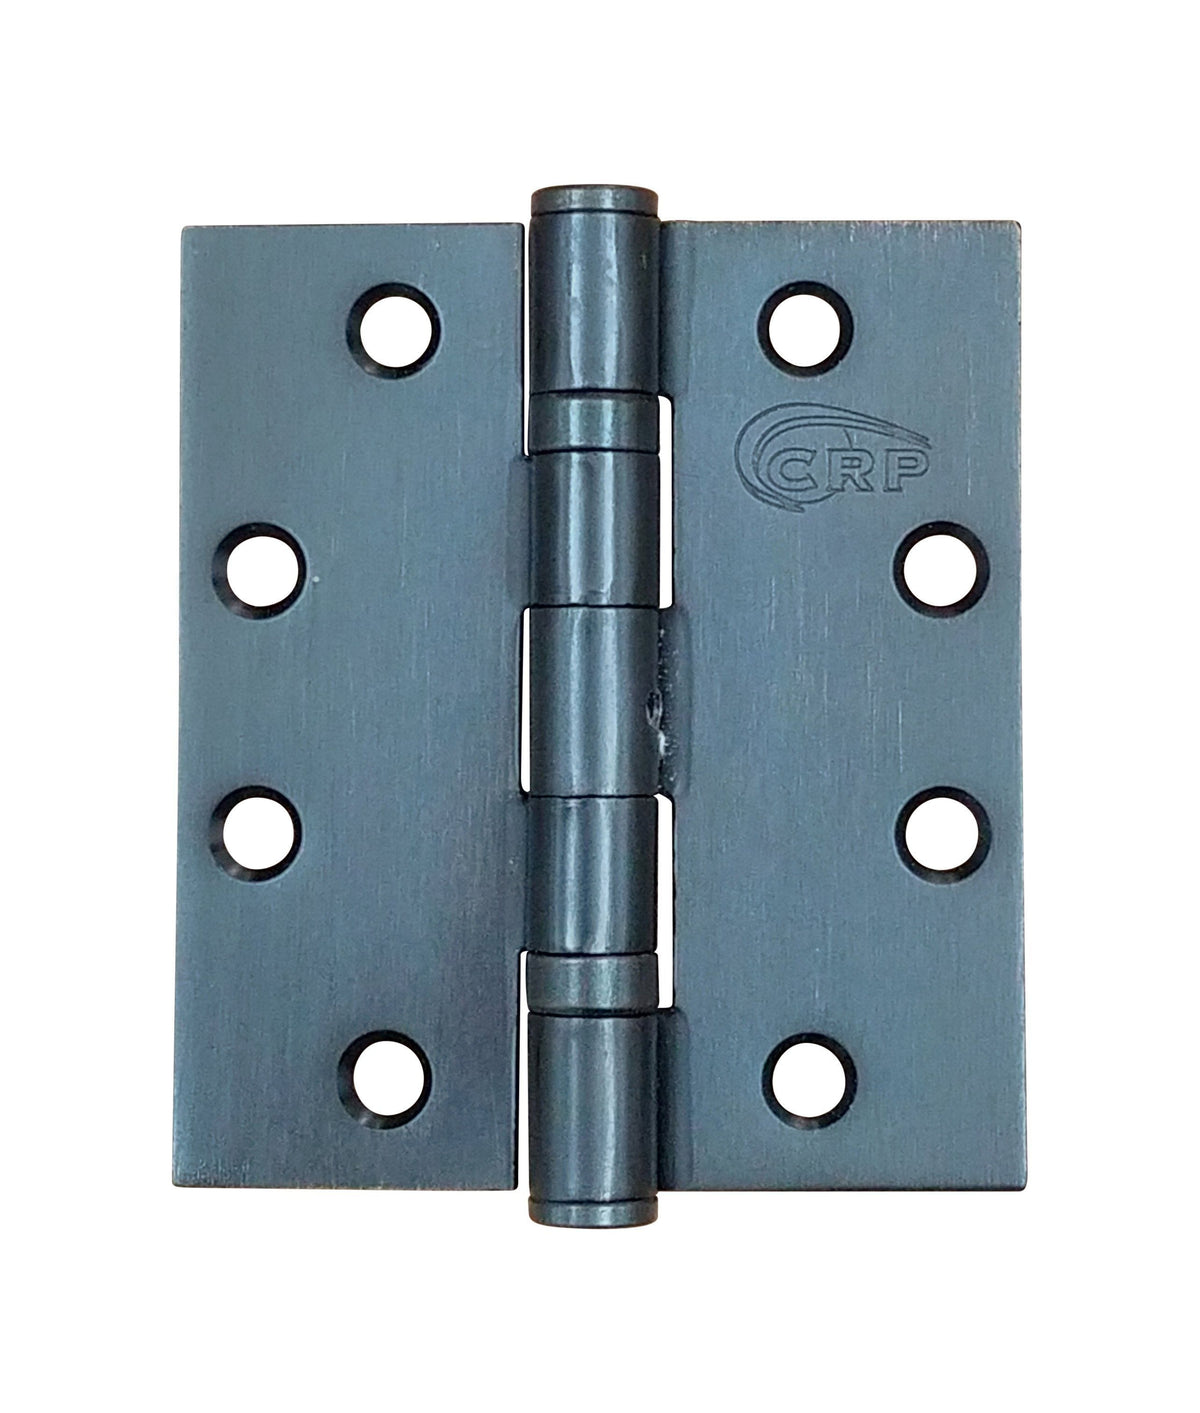 Commercial Ball Bearing Hinges - Heavy Duty Commercial Ball Bearing Door Hinges - 4.5" Inch X 4" Inch - Oil Rubbed Bronze - Non Removable Pin - 2 Pack